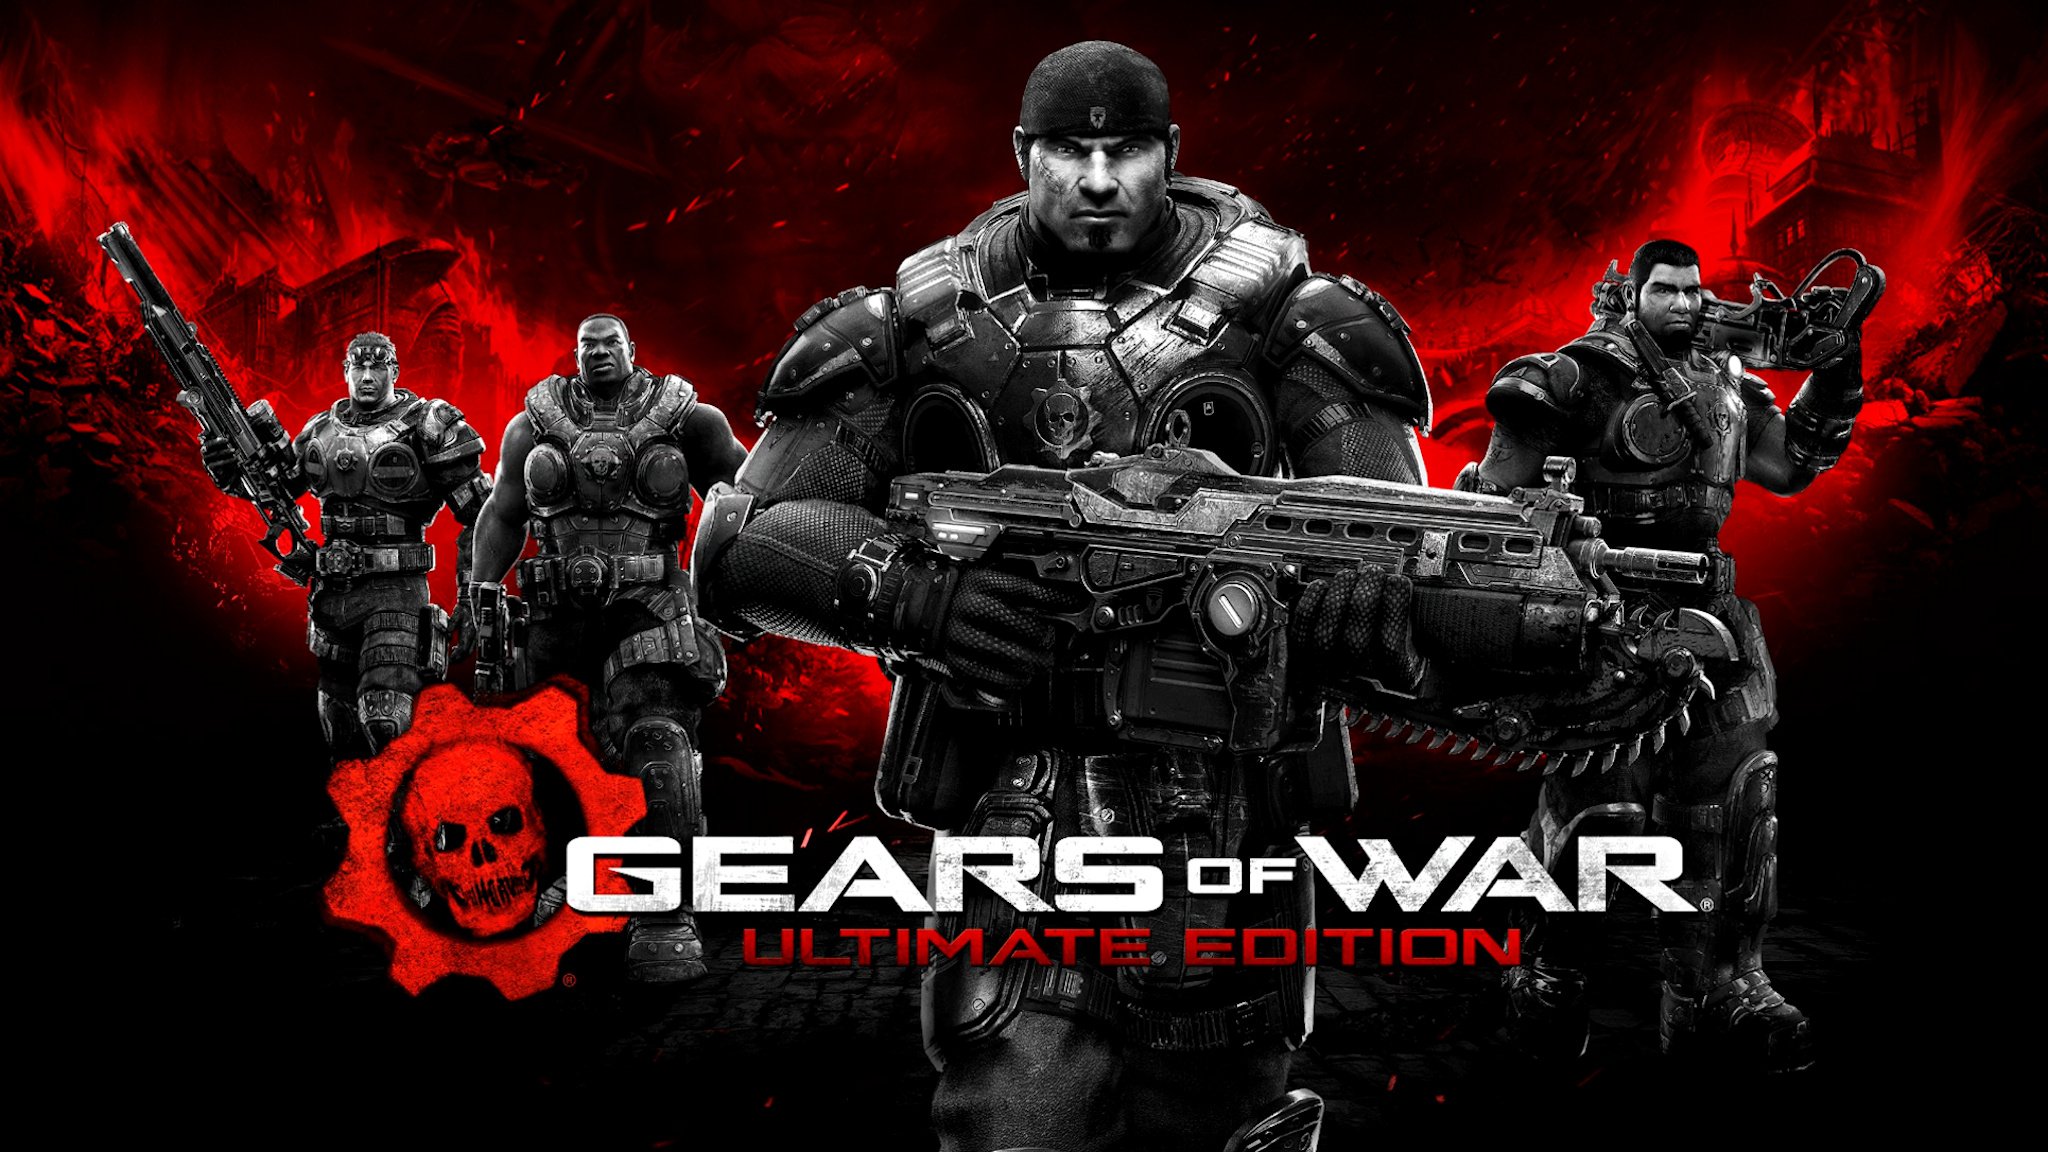 Gears-of-War-Ultimate-Edition-review-main.jpg